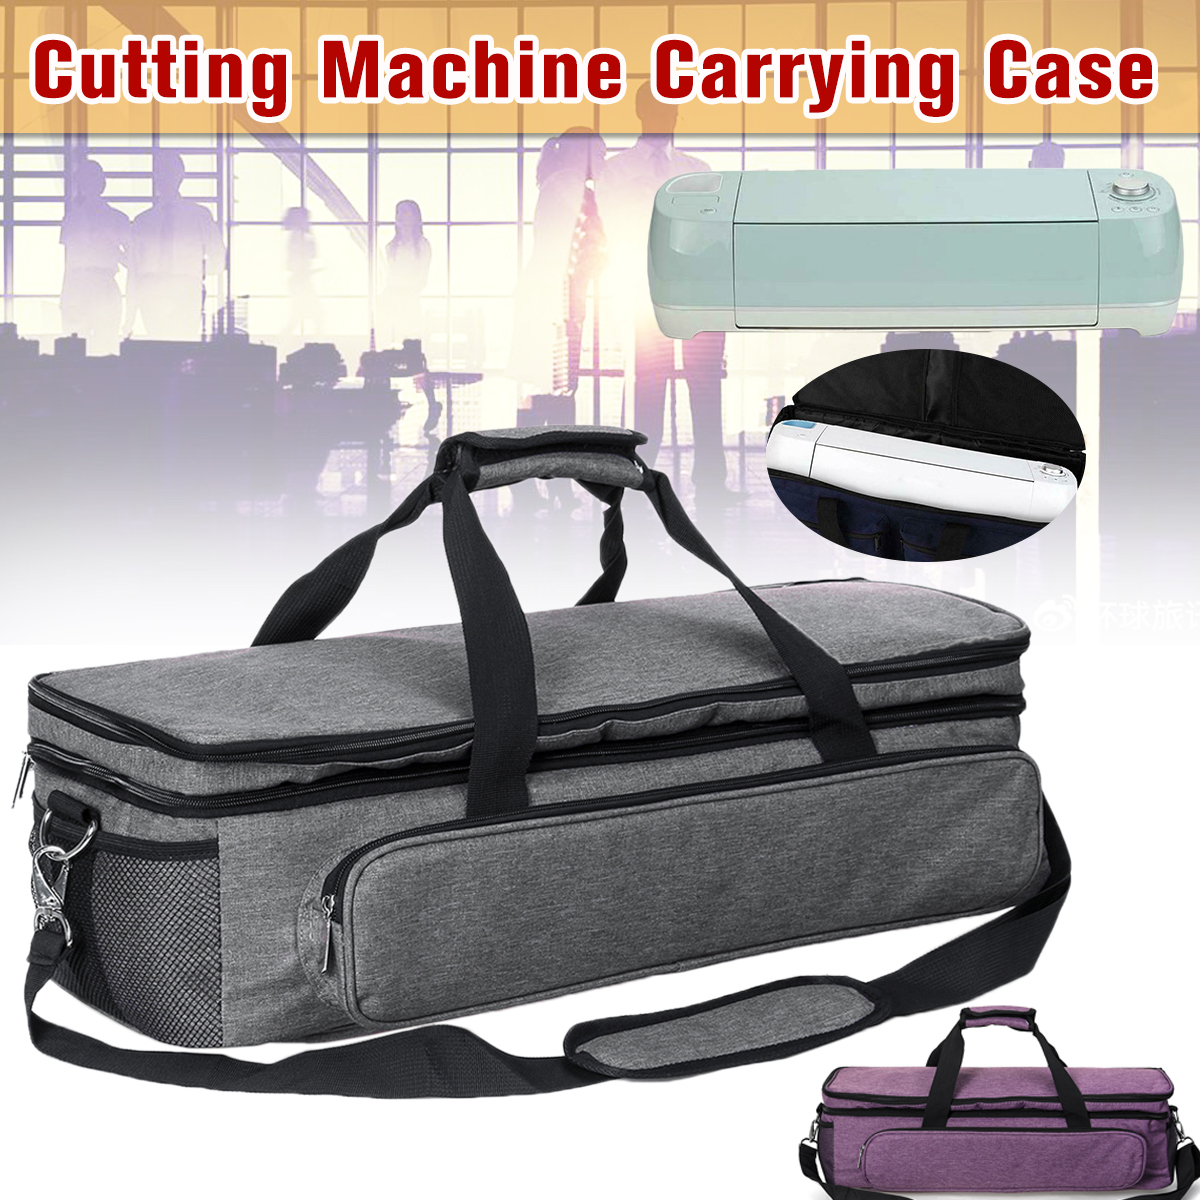 Portable-600D-Oxford-Cloth-Cutting-Machine-Carrying-Storage-Bag-Tool-Travel-Case-1618038-1